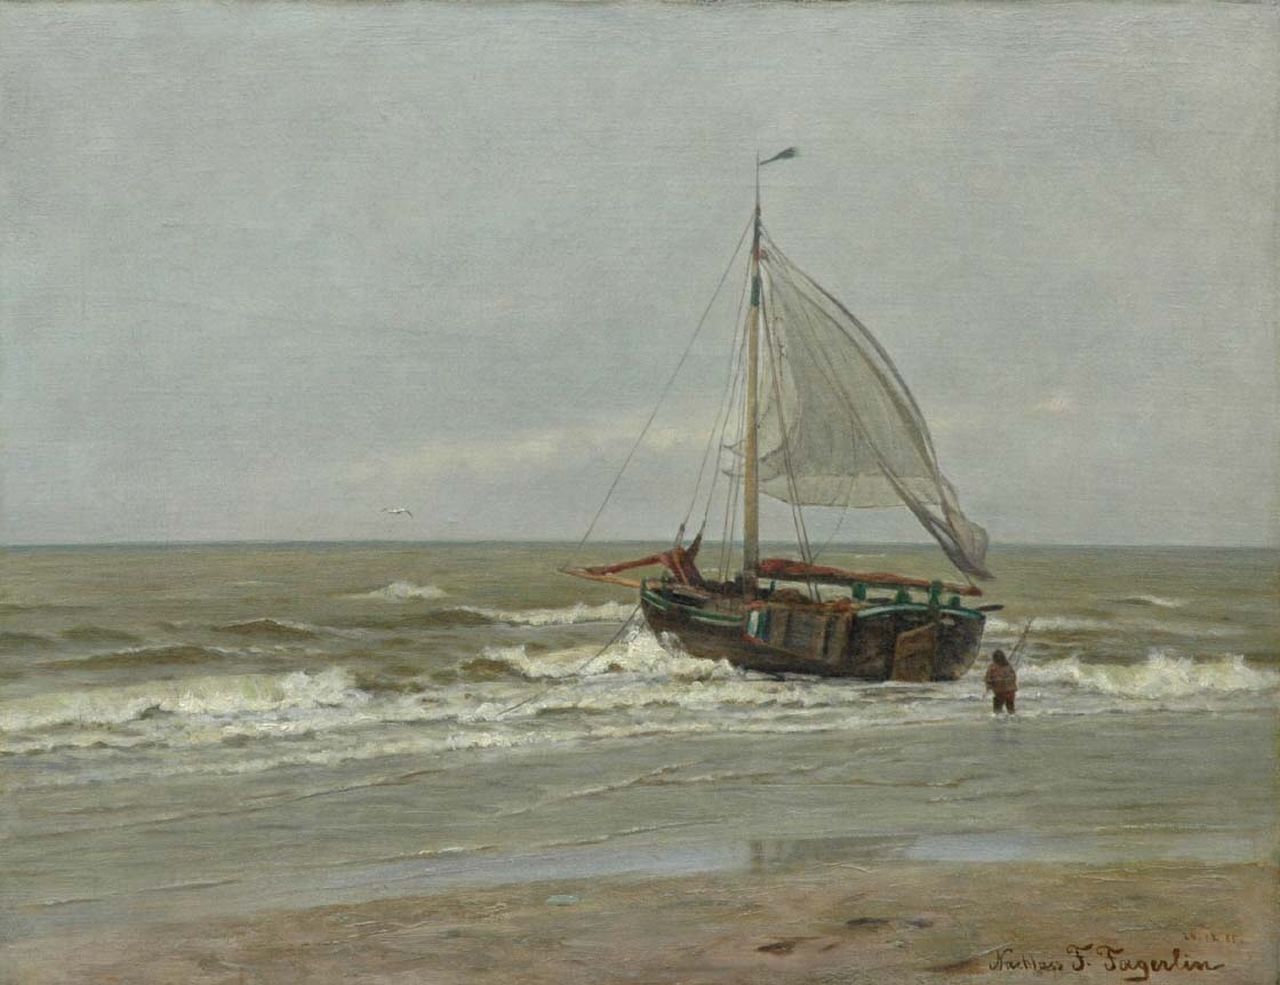 Fagerlin F.J.  | Ferdinand Julius Fagerlin, Fishing boat in the surf, Öl auf Leinwand 37,3 x 48,5 cm, signed l.r. und executed on 24.12.85